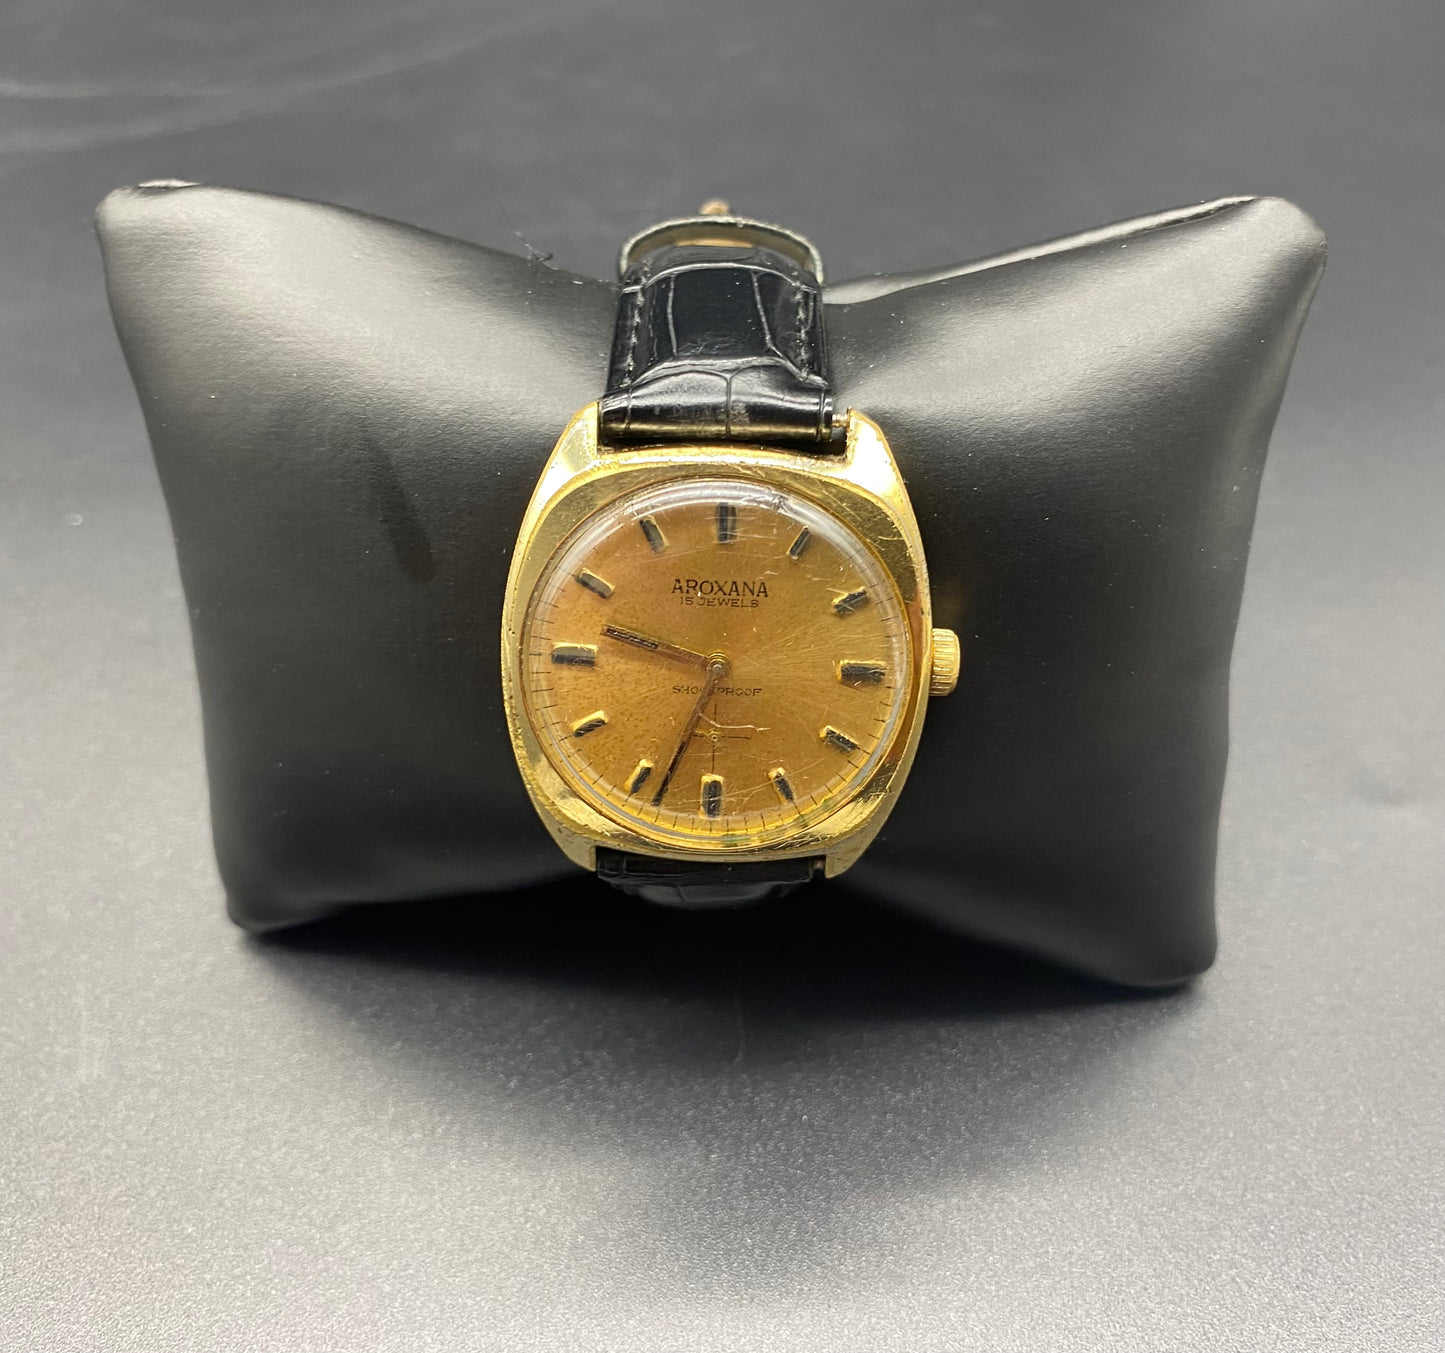 RARE 1960s Mens Mechanical watch on Leather Strap with a Really Nice Champagne Dial 